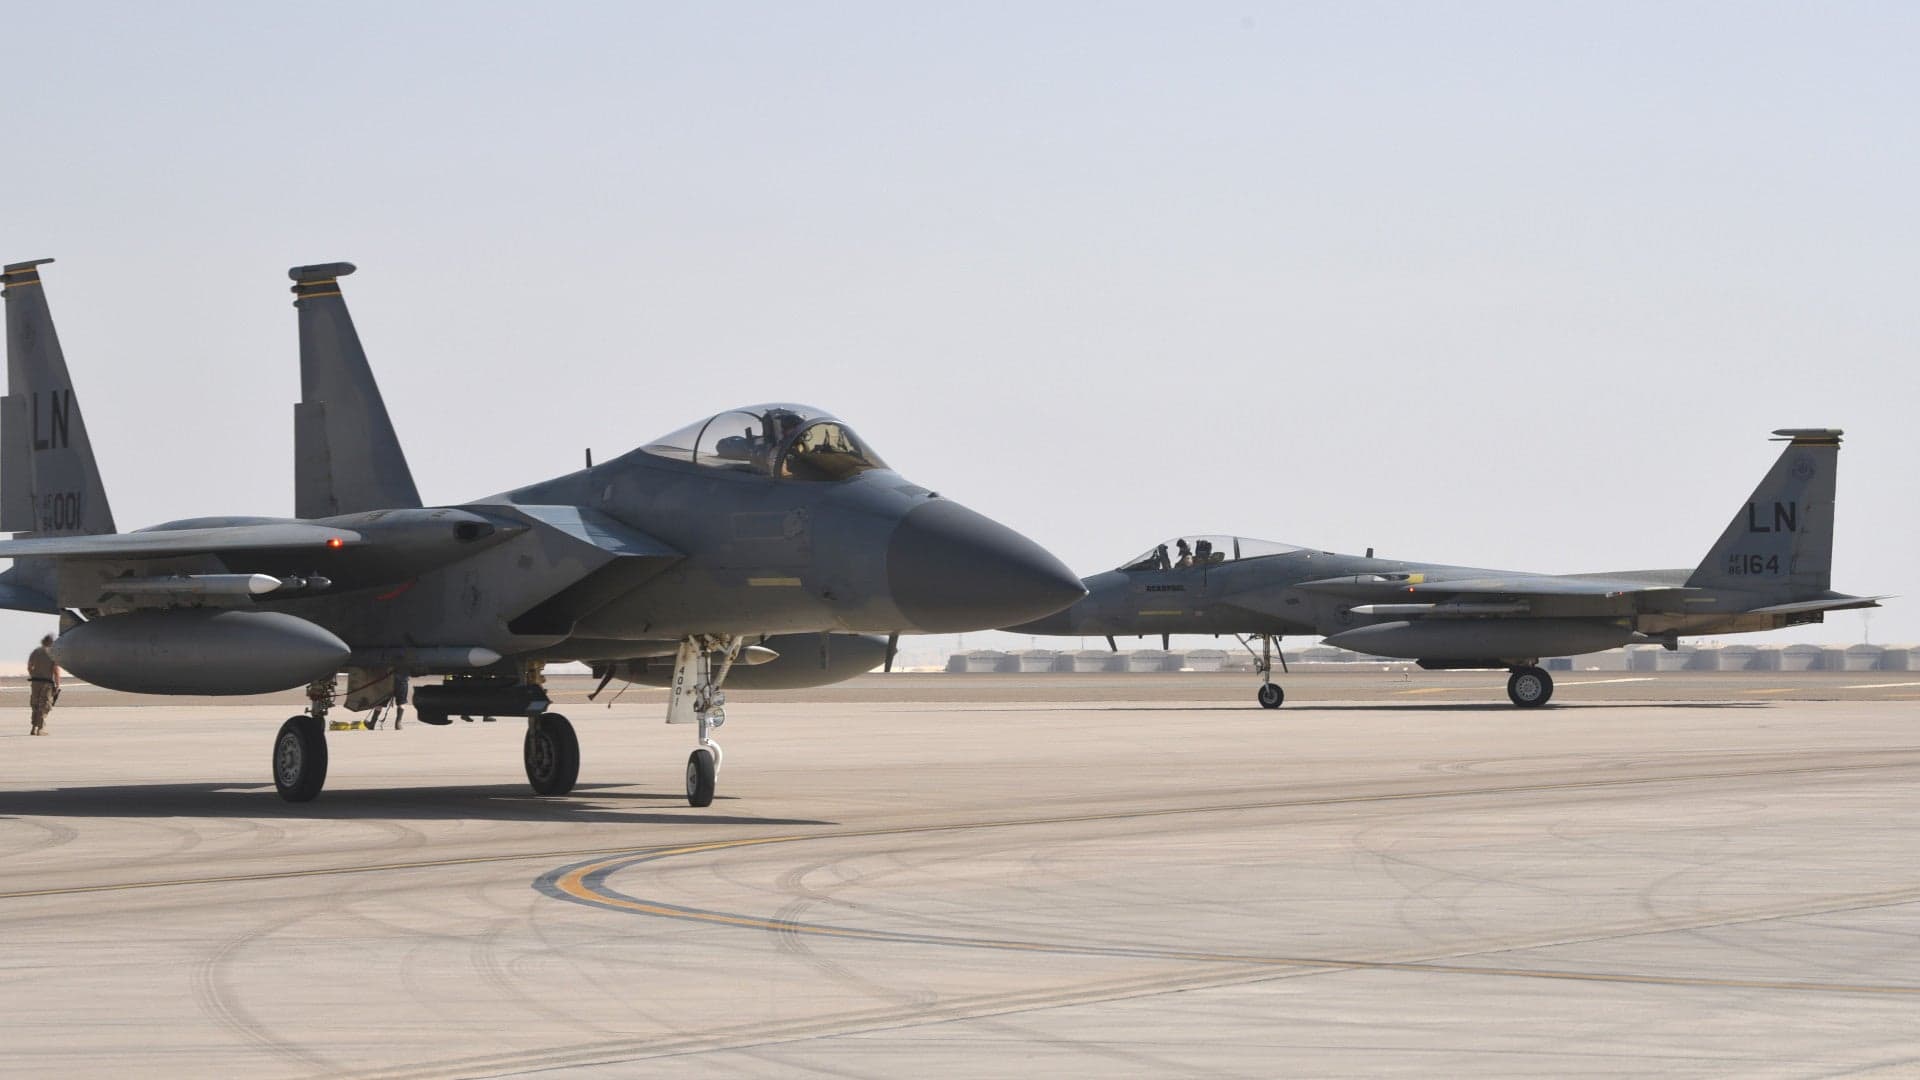 Fully Armed F-15Cs Have Arrived In The Middle East Amid Accusations Of Iranian Threats (Updated)